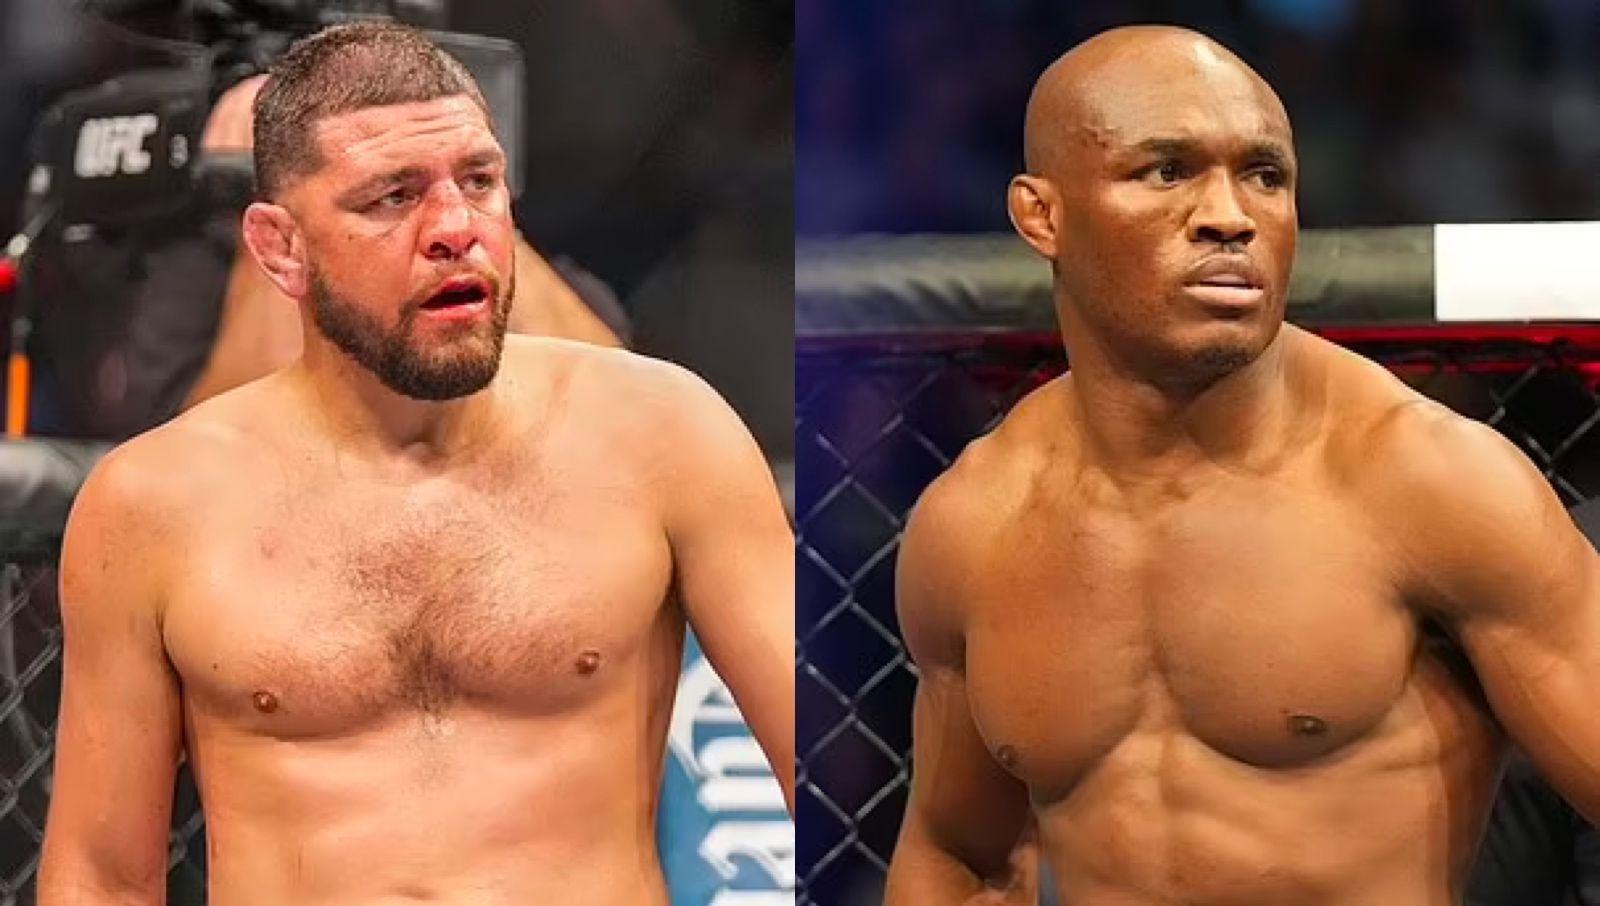 Nick Diaz wants to fight Kamaru Usman for the UFC Welterweight title at the end of 2022